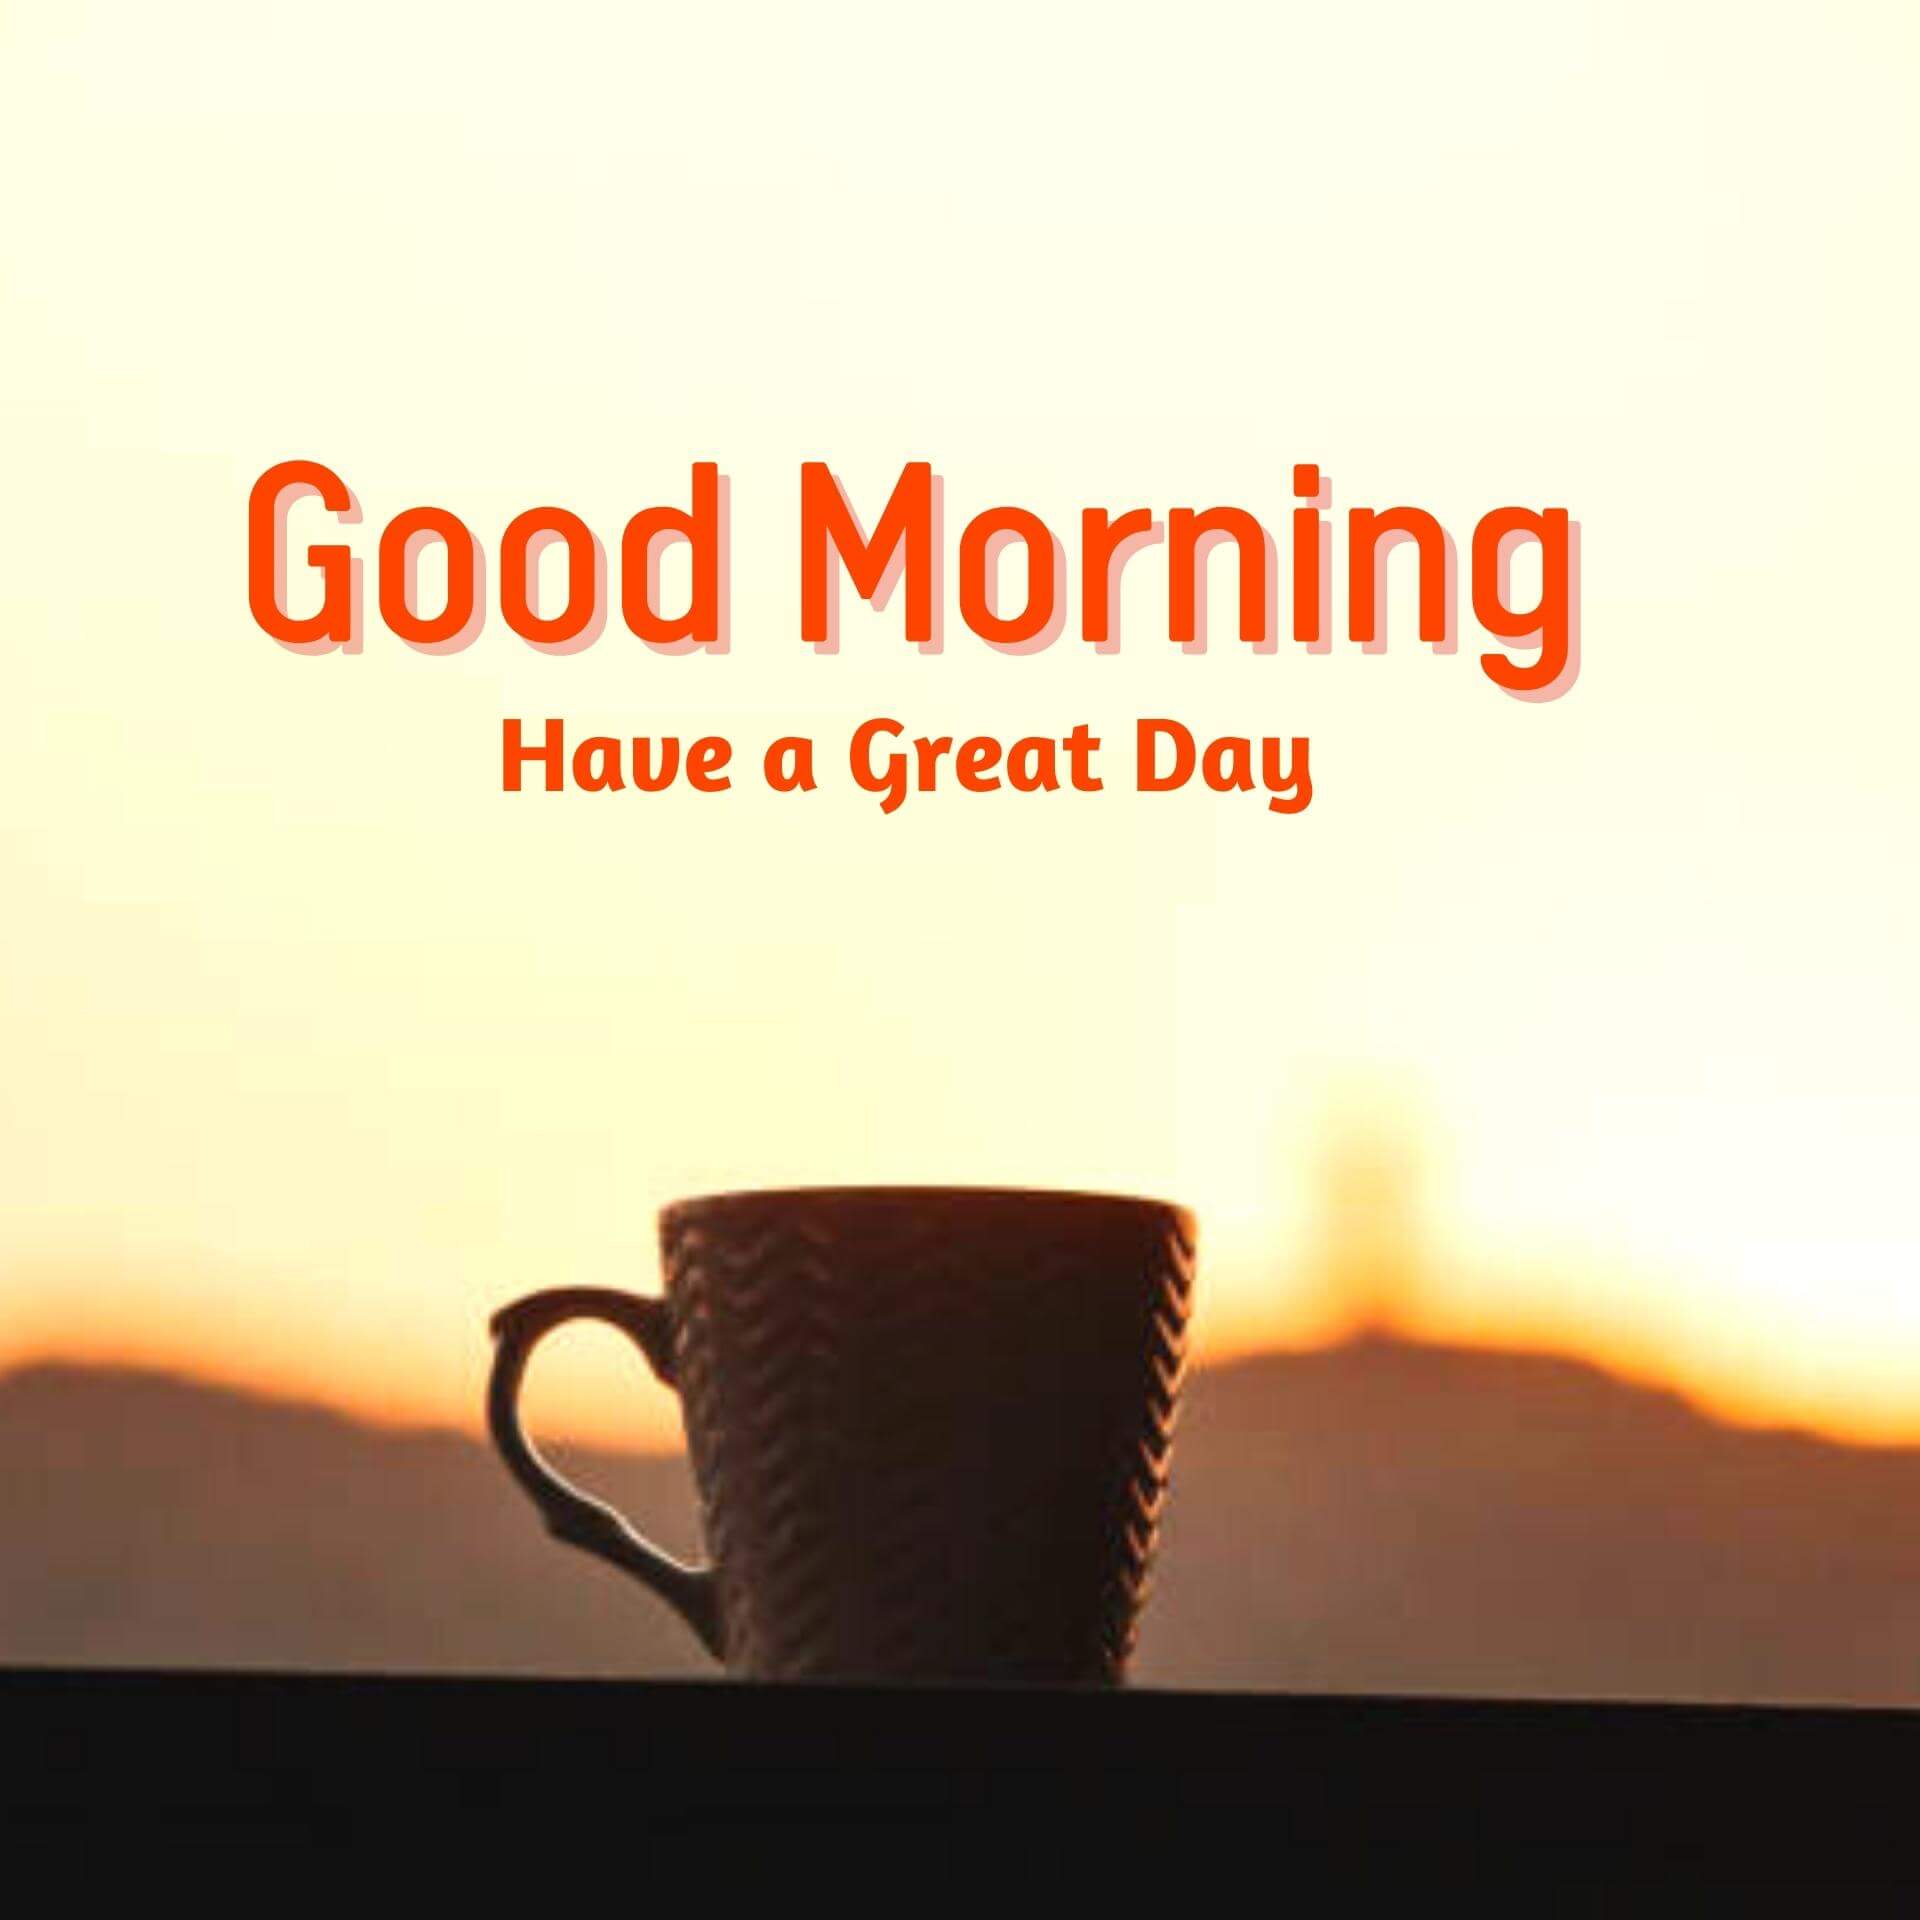 good morning wishes pictures free download